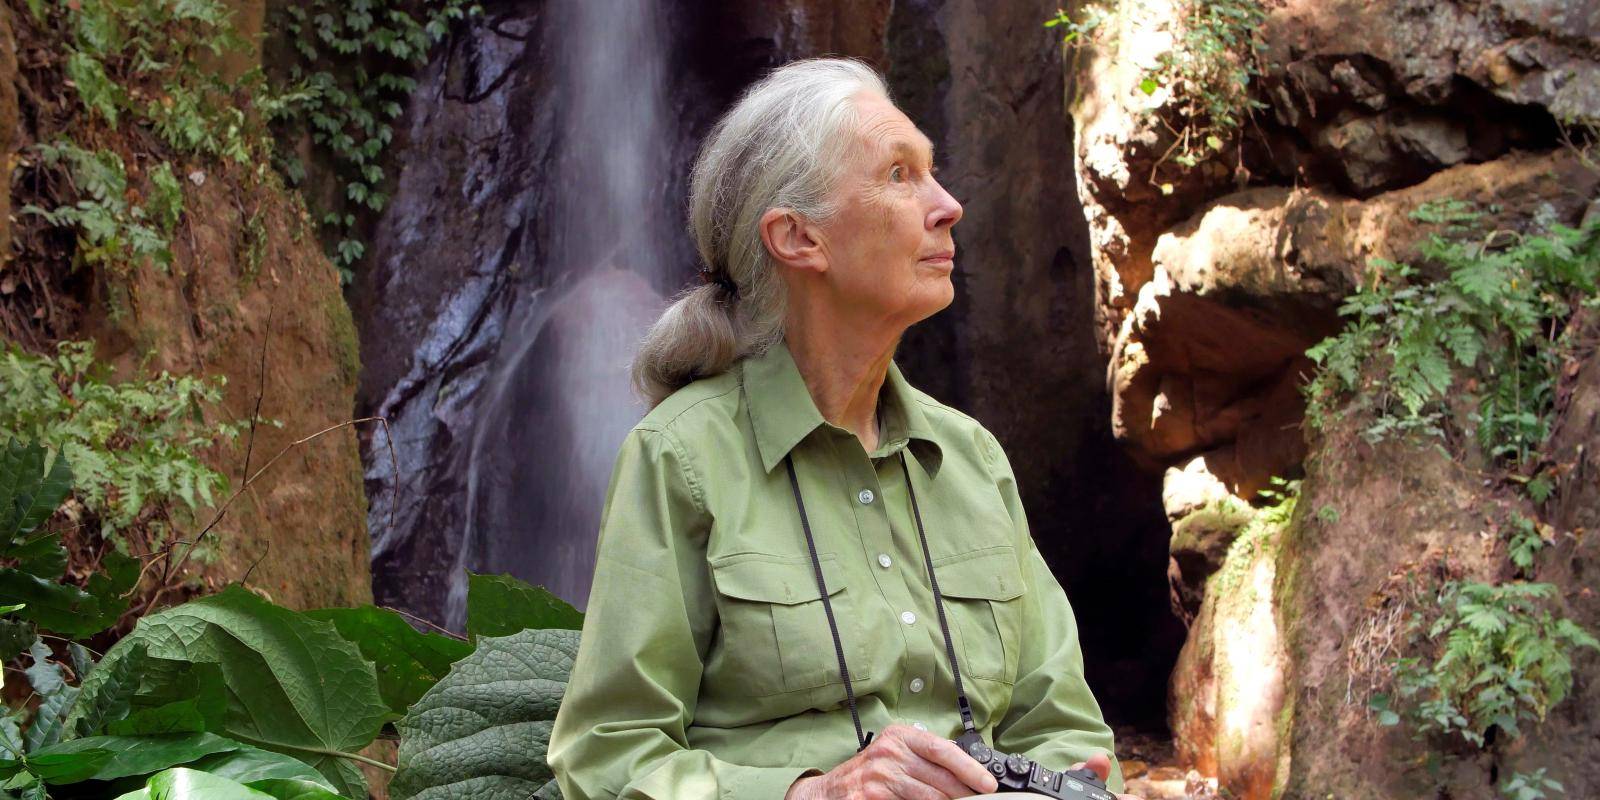 Dr. Jane Goodall certainly inspires hope through action. It was a